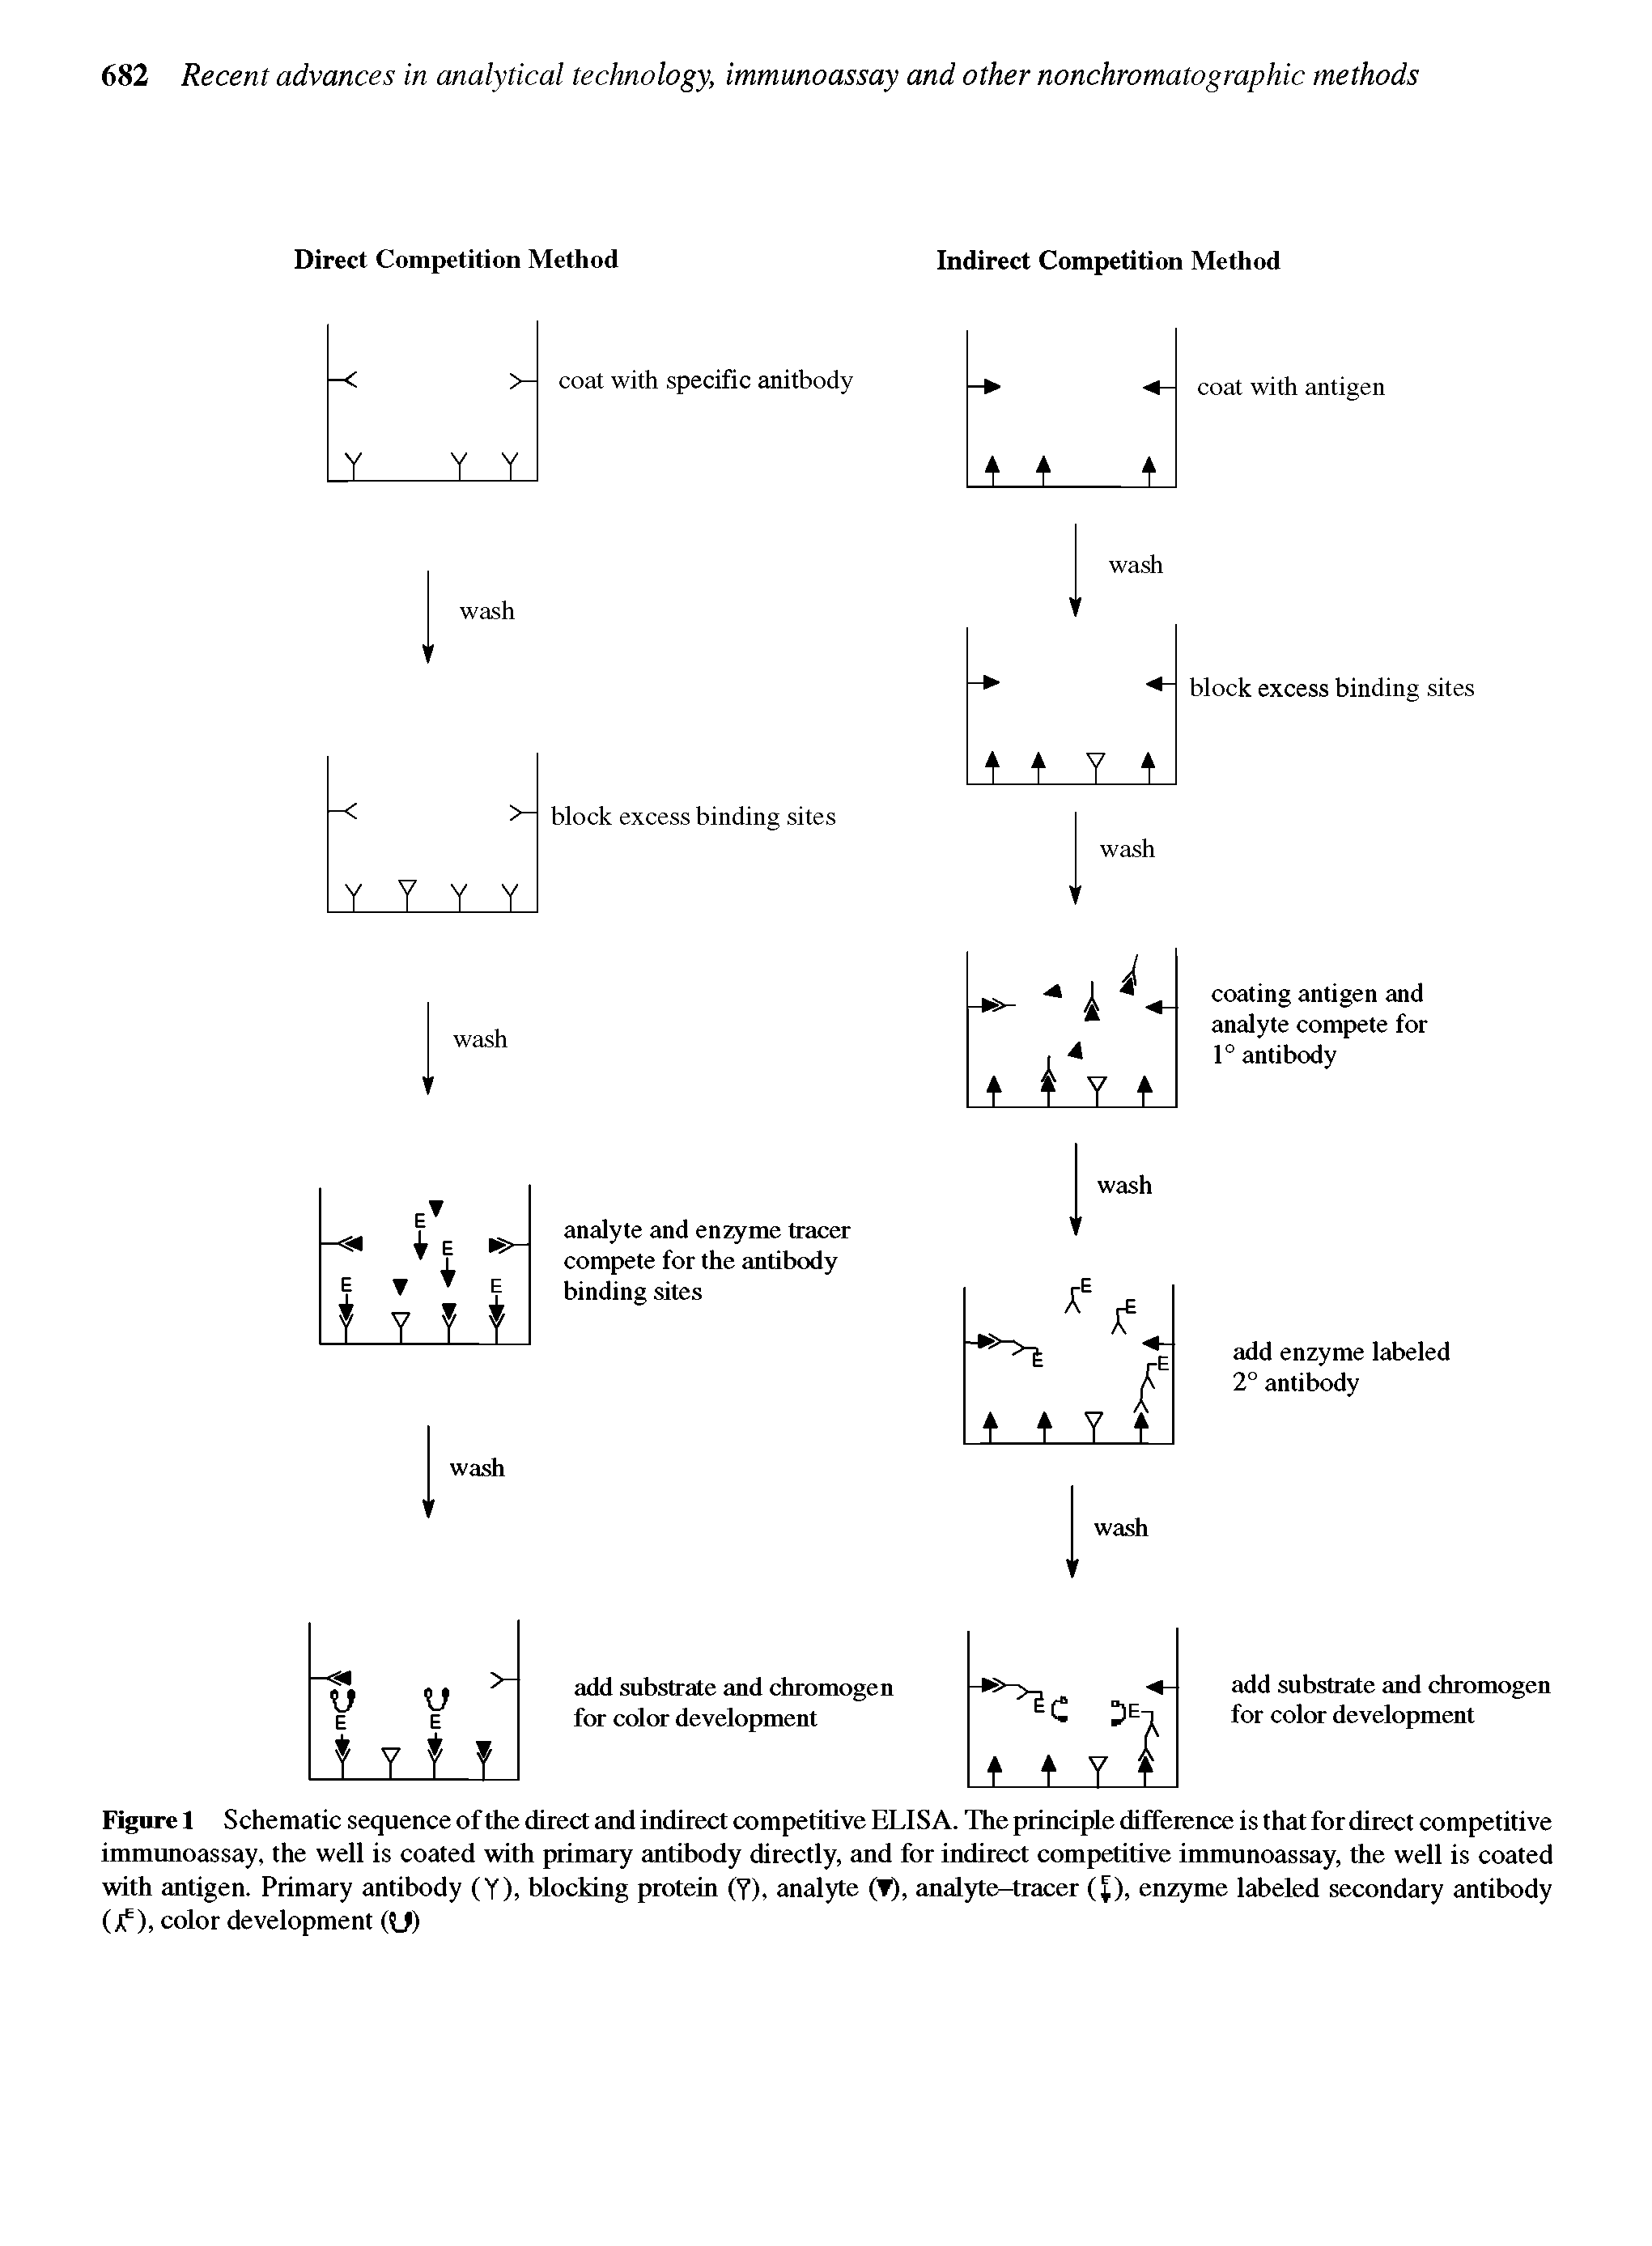 Figure 1 Schematic sequence of the direct and indirect competitive ELISA. The principle difference is that for direct competitive immunoassay, the well is coated with primary antibody directly, and for indirect competitive immunoassay, the well is coated with antigen. Primary antibody (Y), blocking protein (Y), analyte (T), analyte-tracer ( ), enzyme labeled secondary antibody ), color development ( J)...